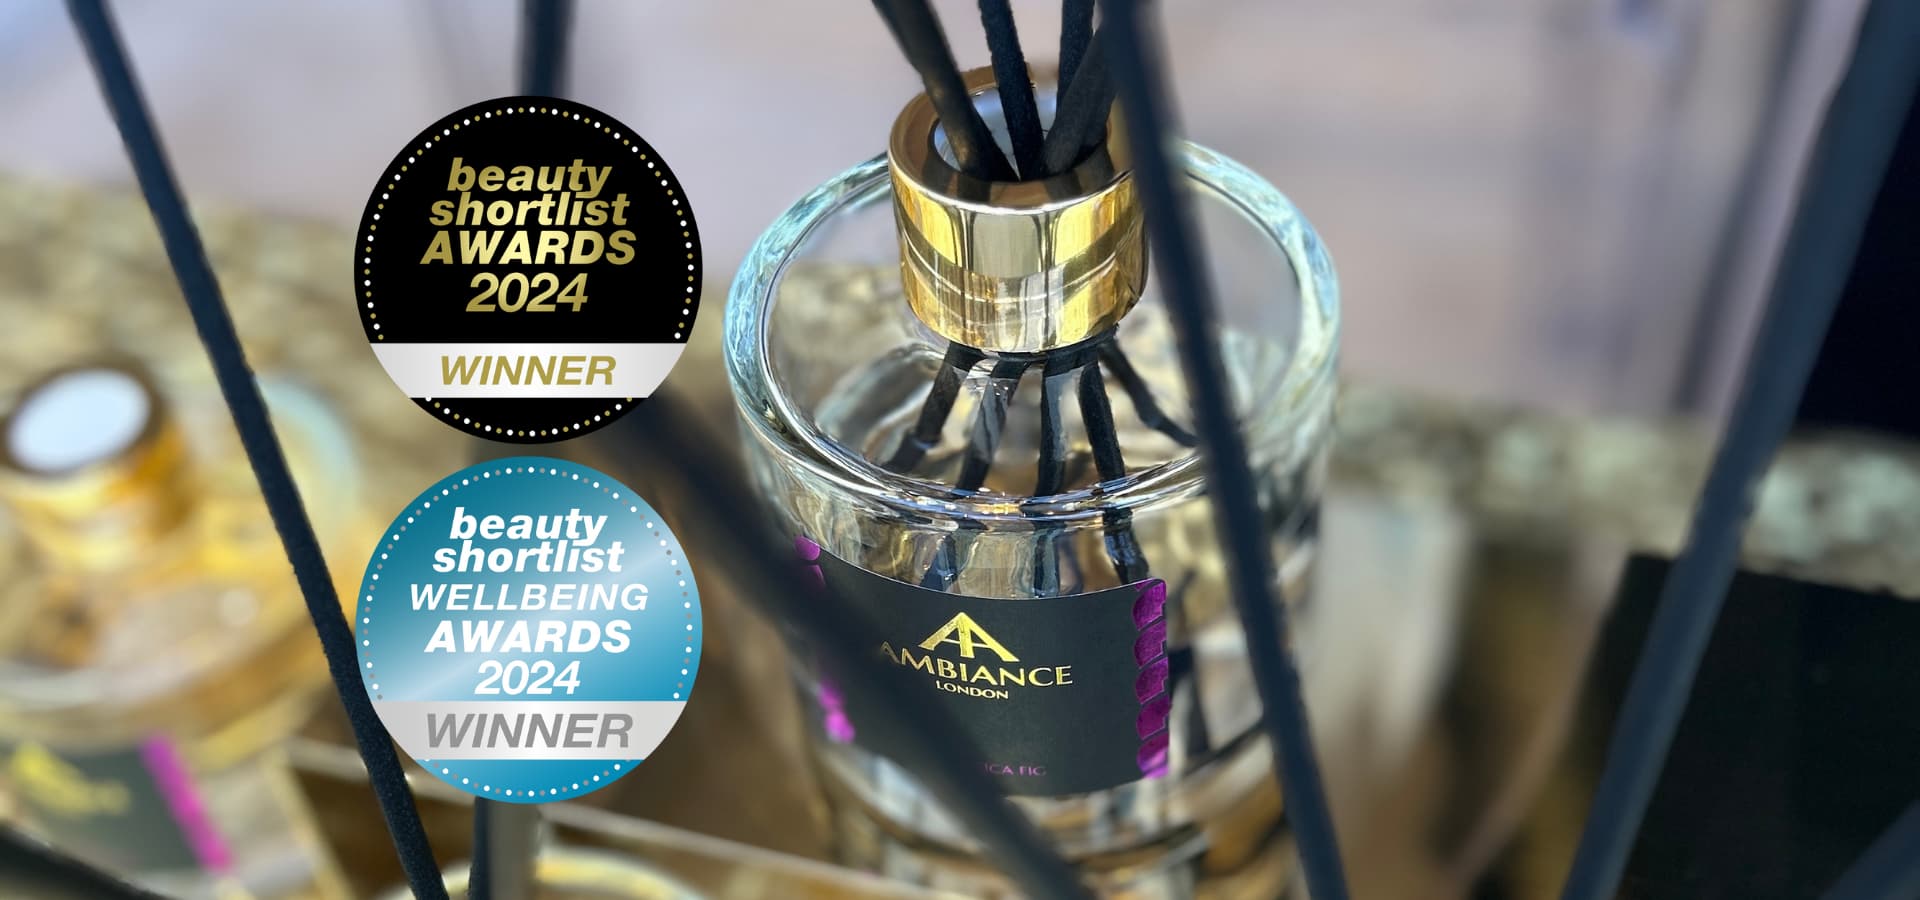 Adriatica Fig Reed Diffuser. Beauty Shortlist Awards 2024 Home Fragrance Of The Year Winner, Ancienne Ambiance London.